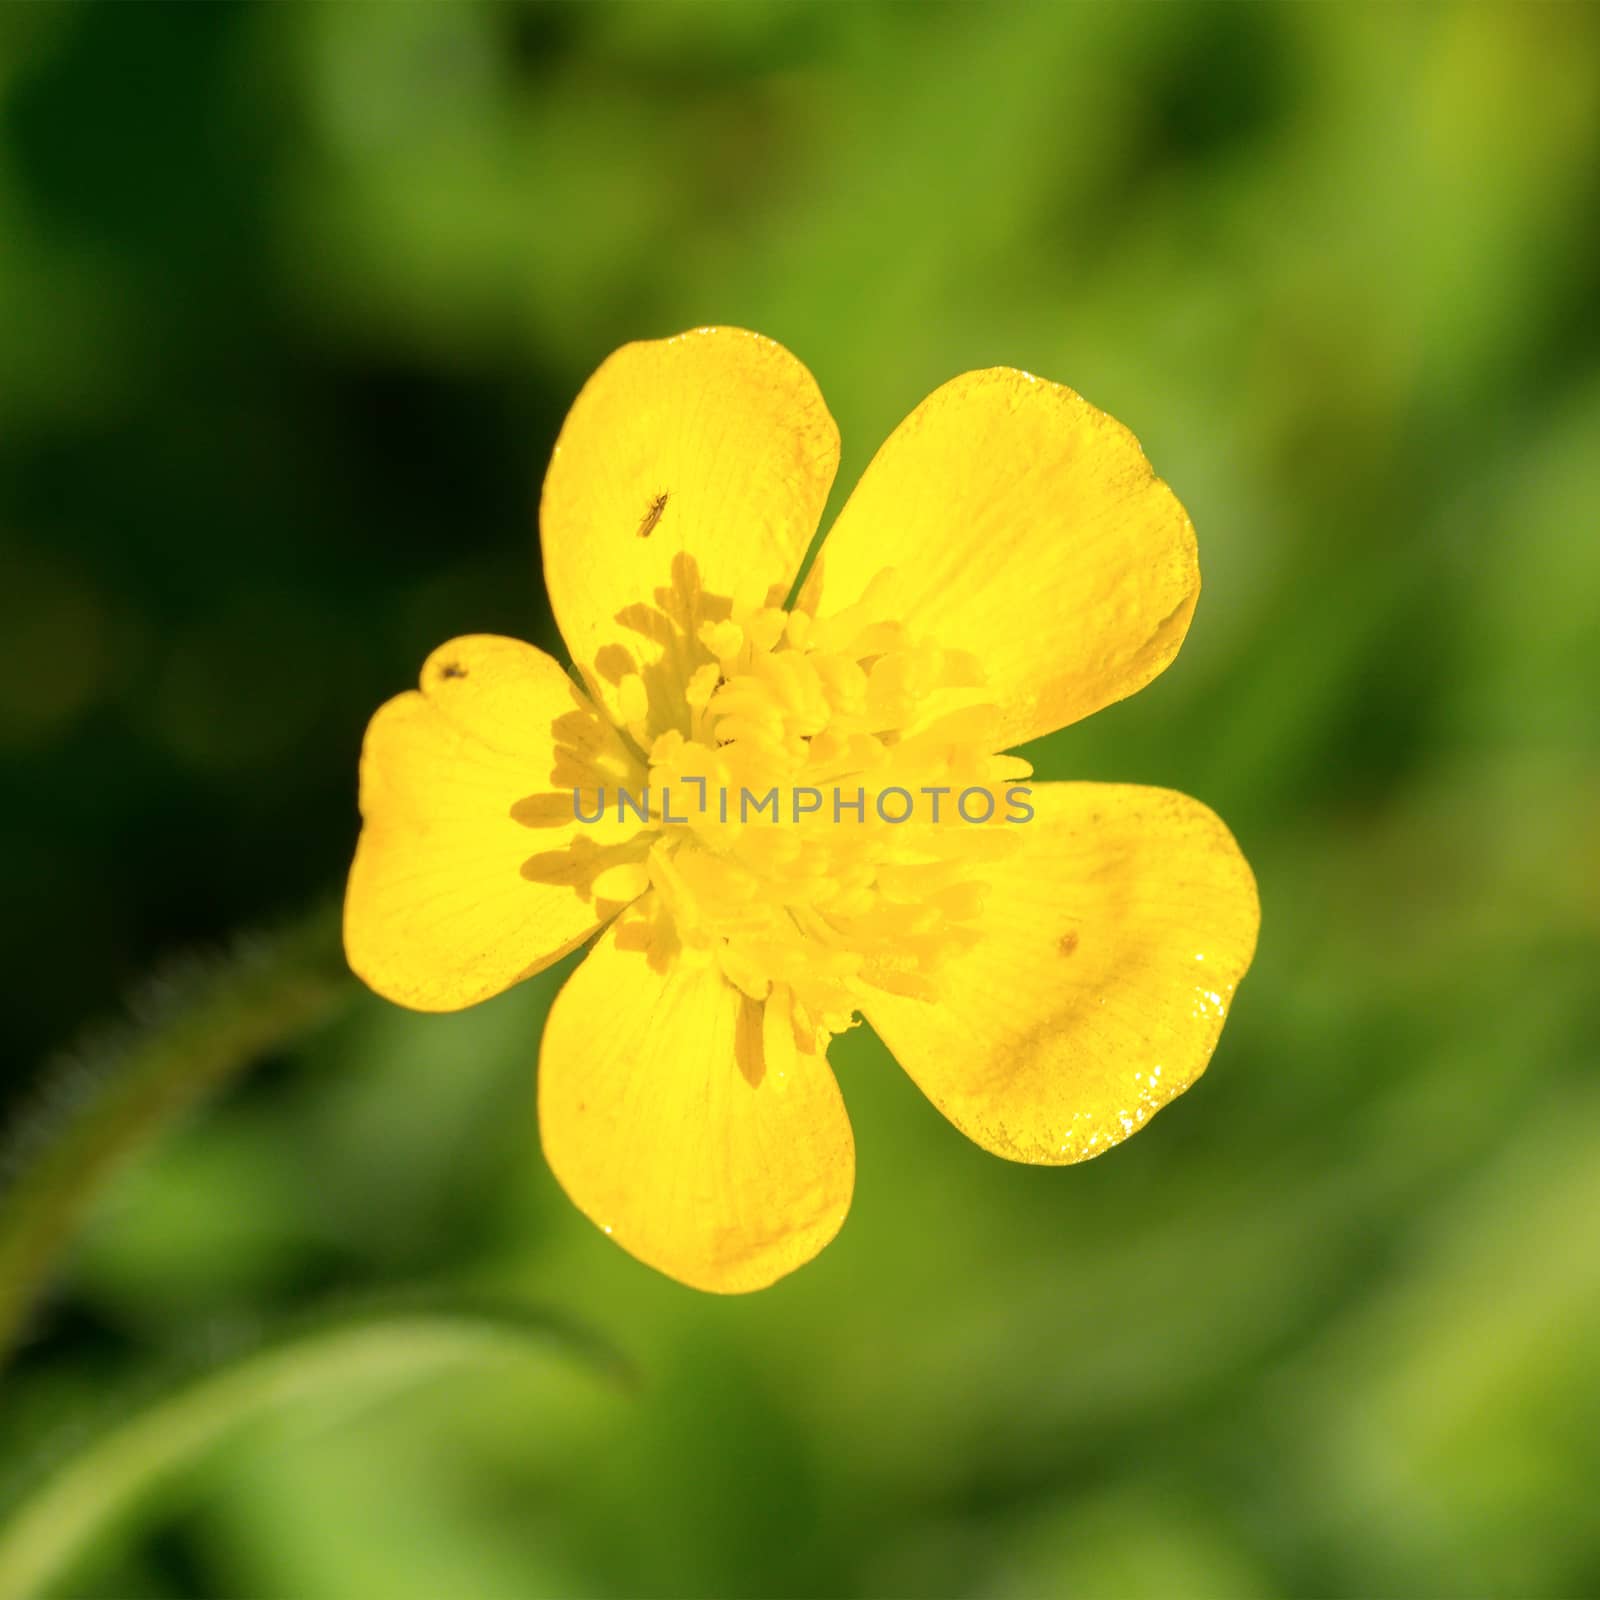 Yellow flowers on a blured green background